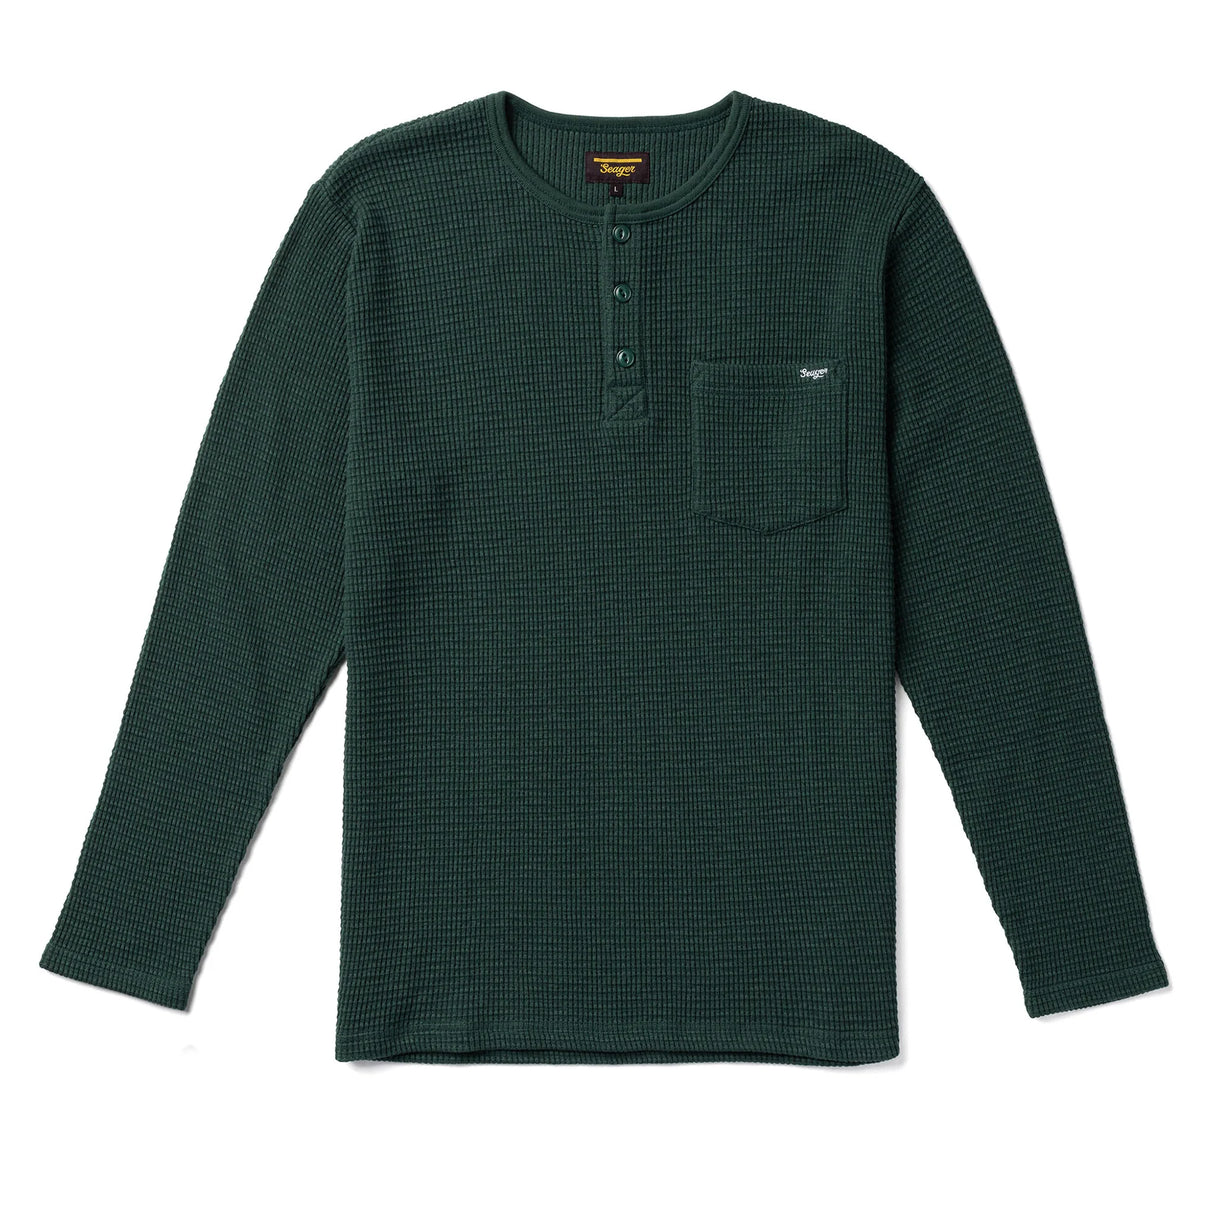 Seager Sawpit Dark Green Henley L/s Thermal Shirt